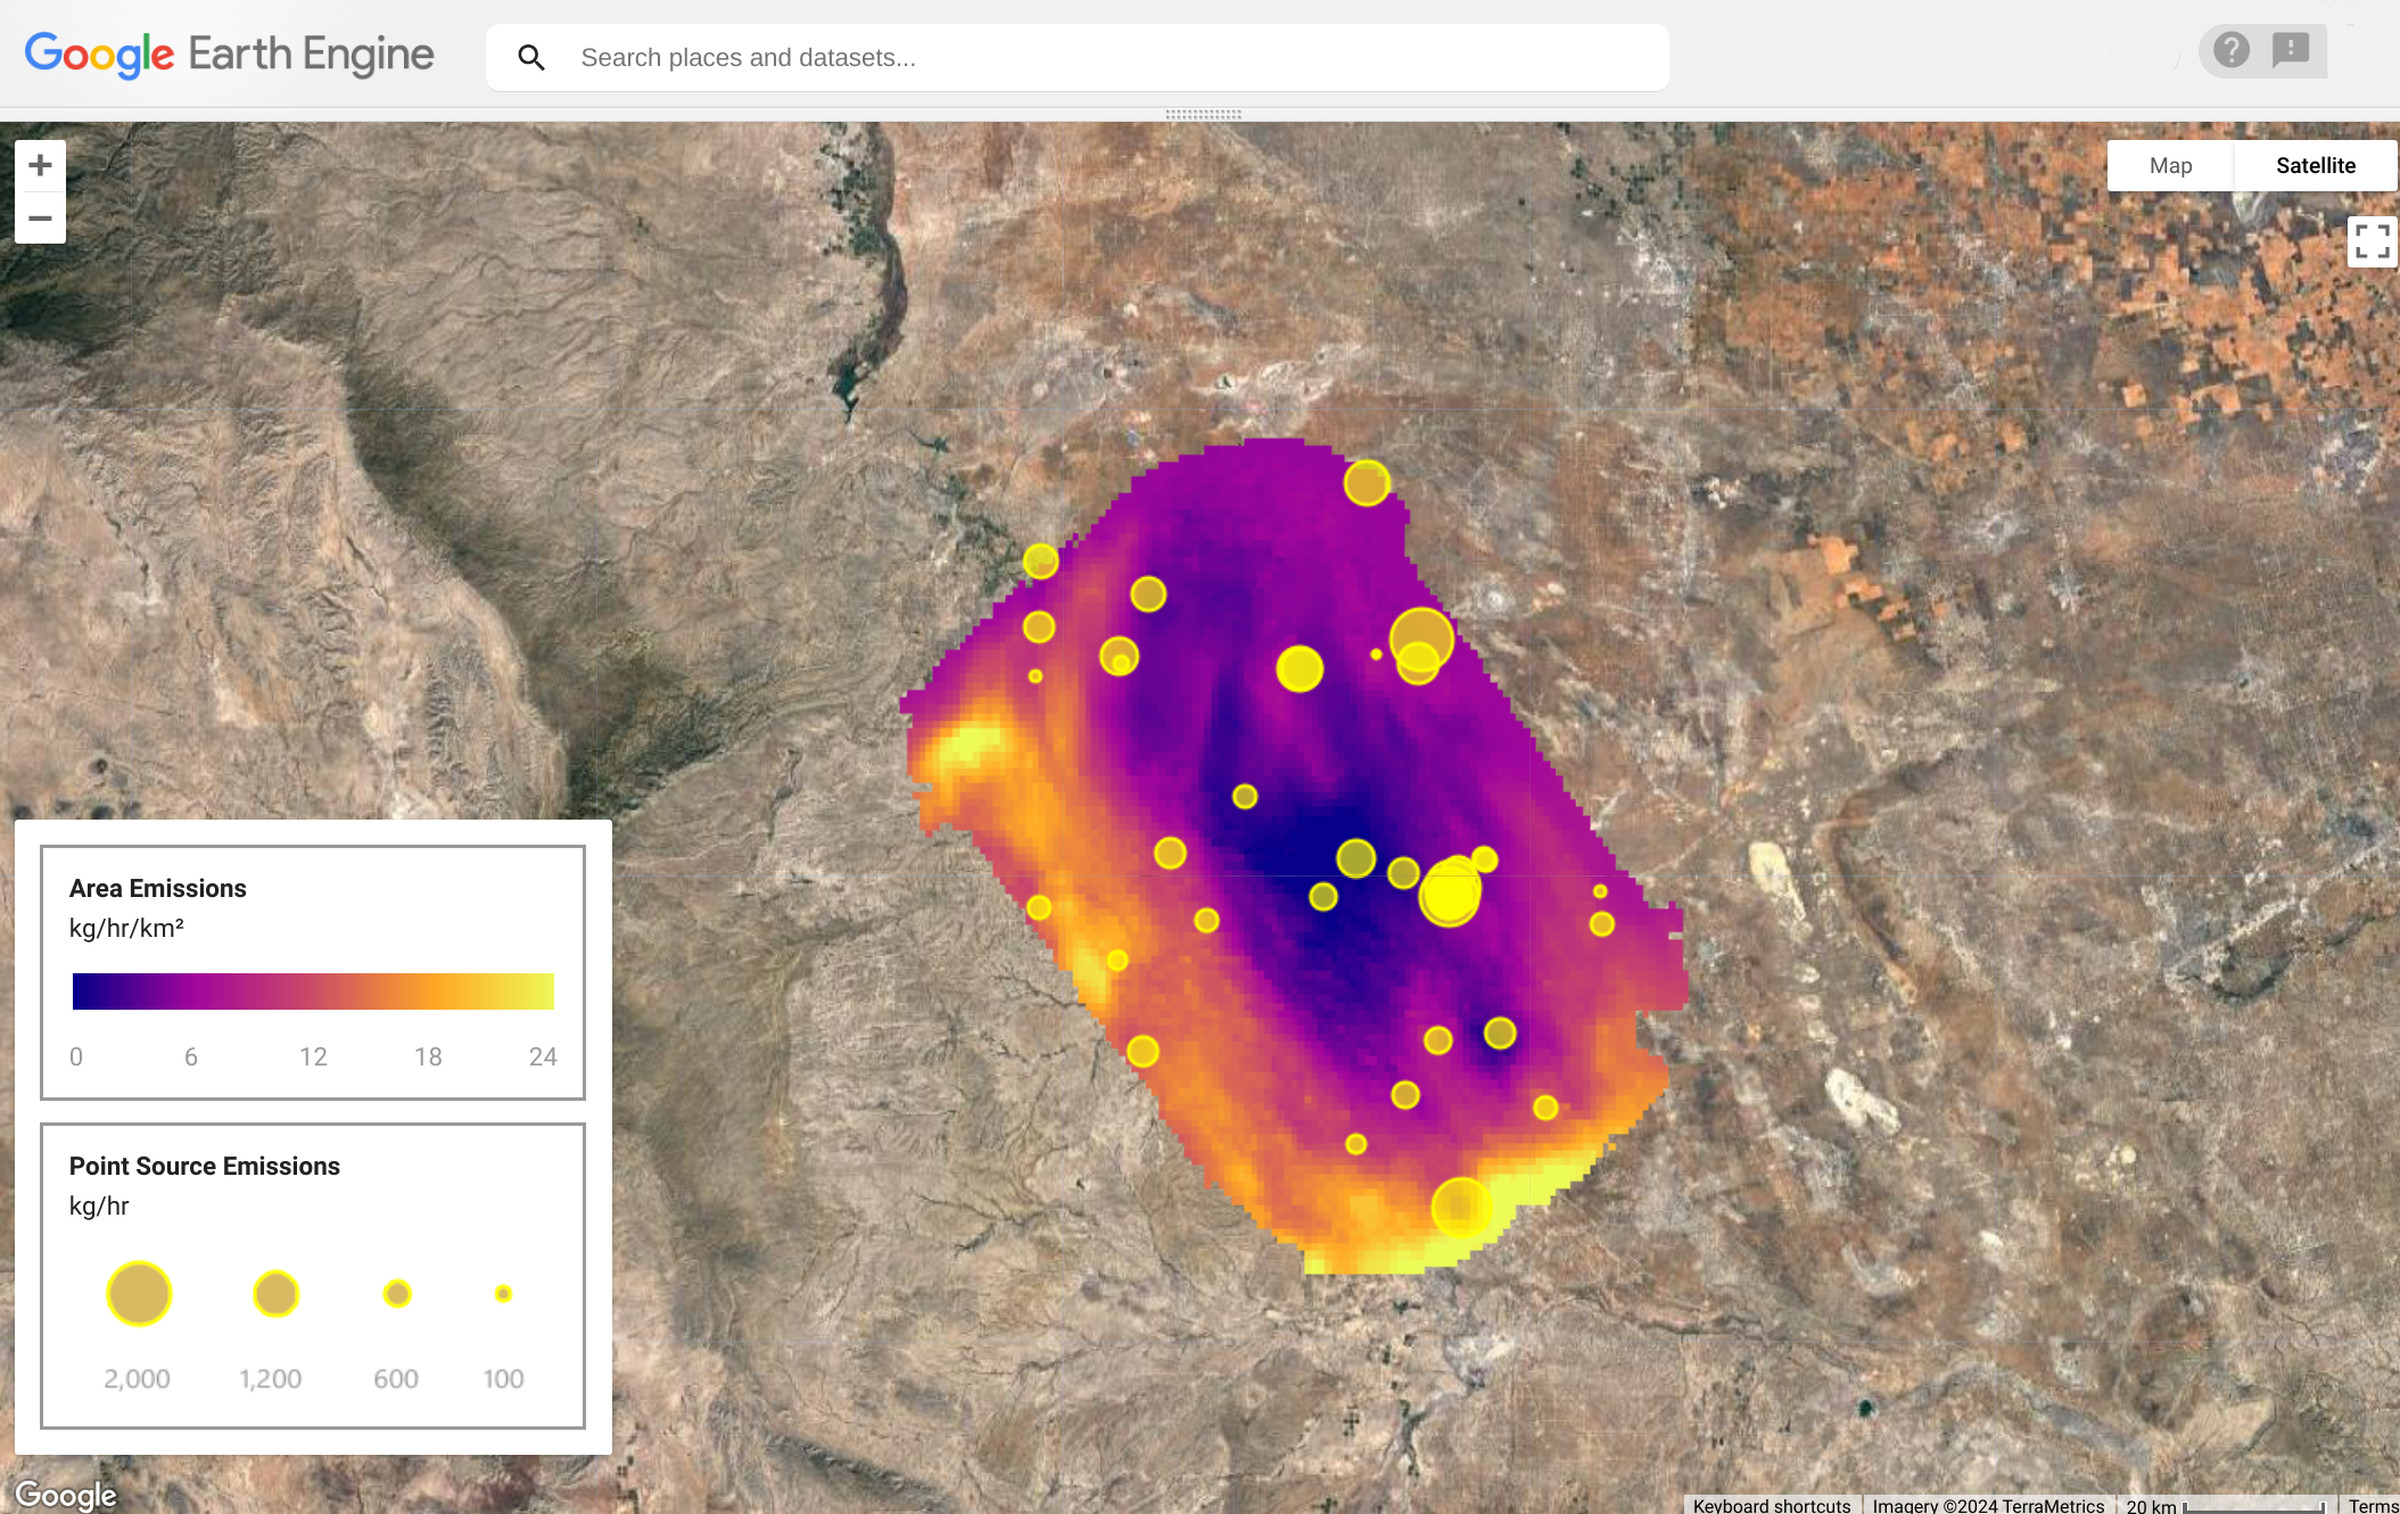 A heat map of methane emissions is layered on top of a satellite image of a section of Earth. A legend on the map shows that purple indicates lower concentrations of methane while warmer colors depict higher concentrations. Yellow dots depict high-emitting sources of pollution.